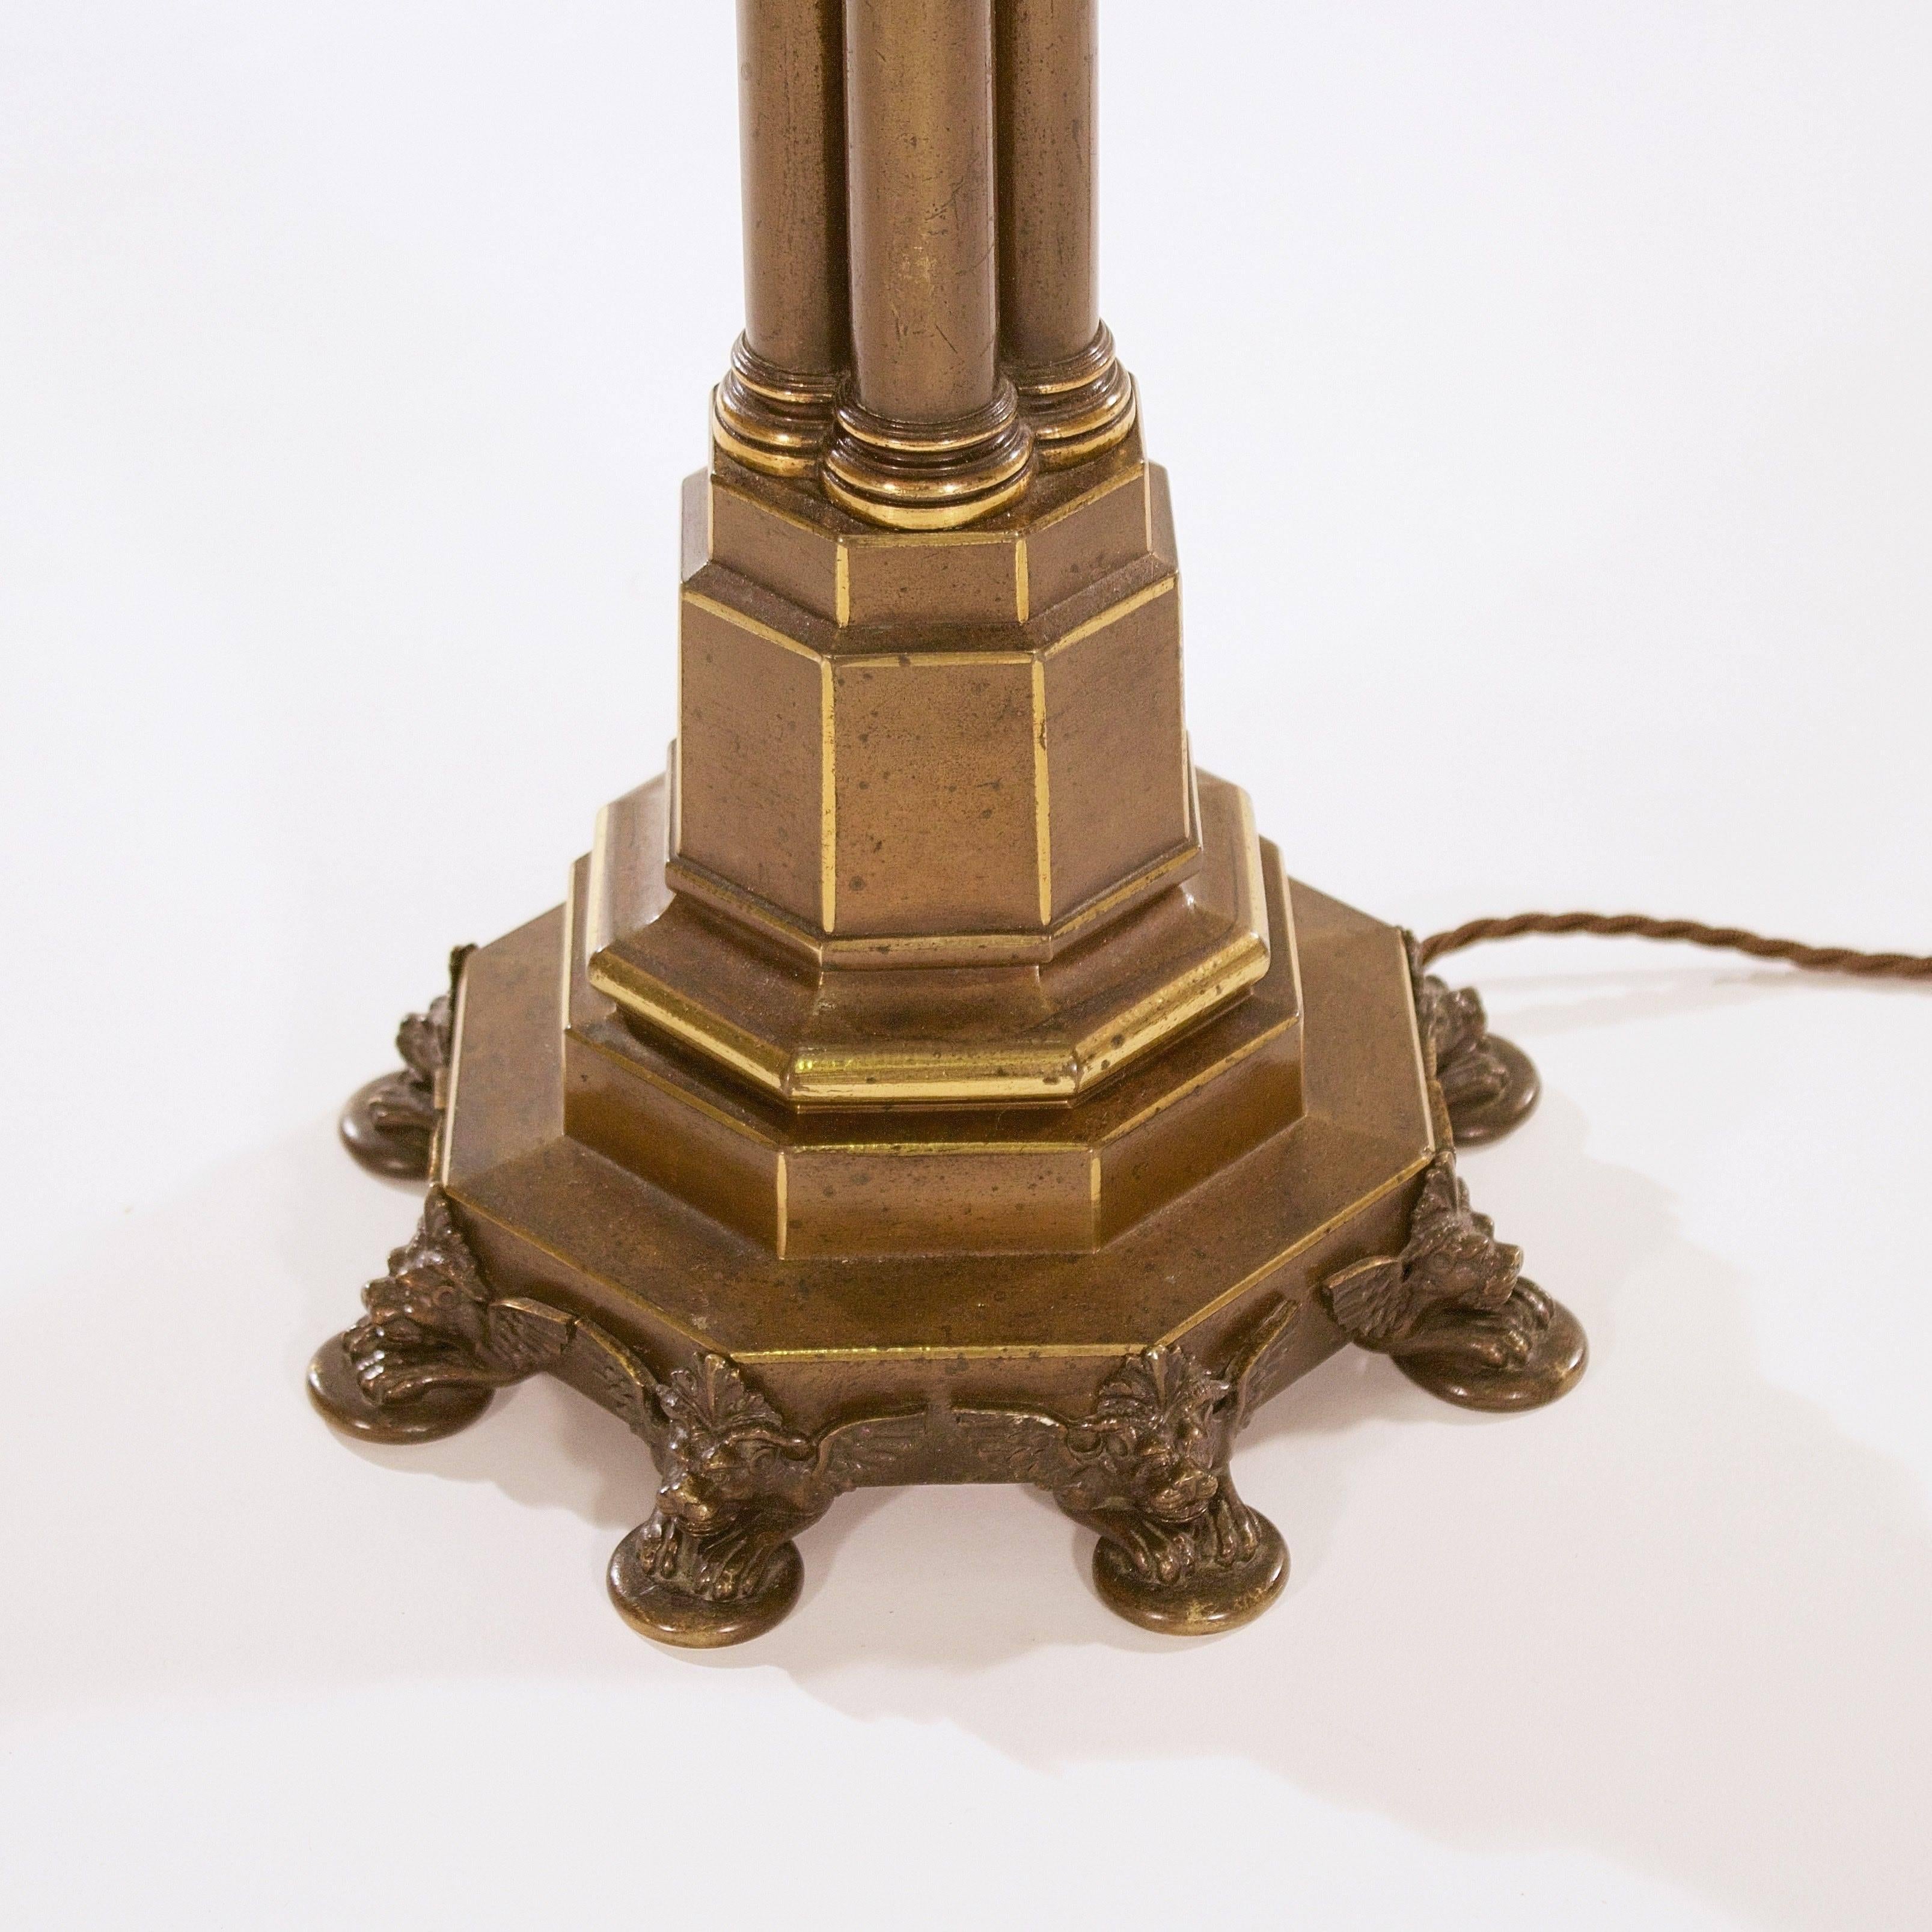 With a scolling leaf capital supported by a cluster column stem on an octagonal stepped plinth base with chimera feet,

England, circa 1825.

Measurement taken to the top of the capital.